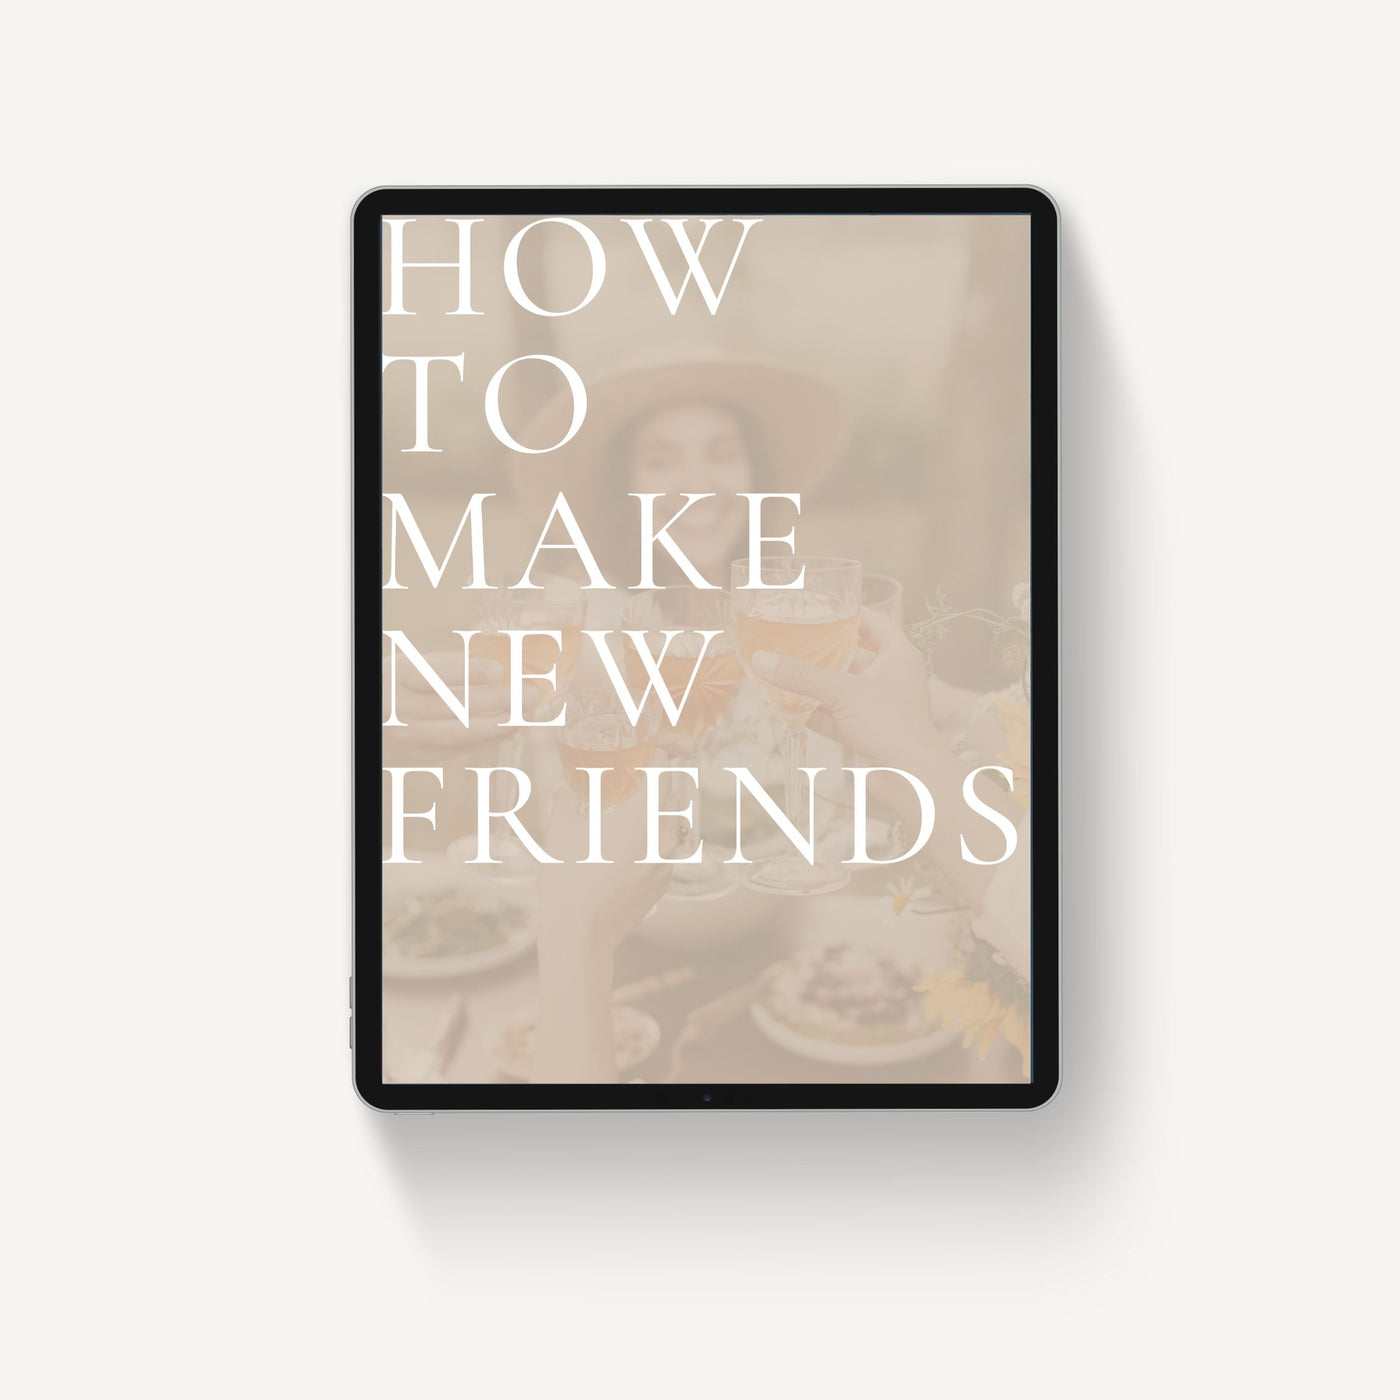 How to Make Friends in a New City